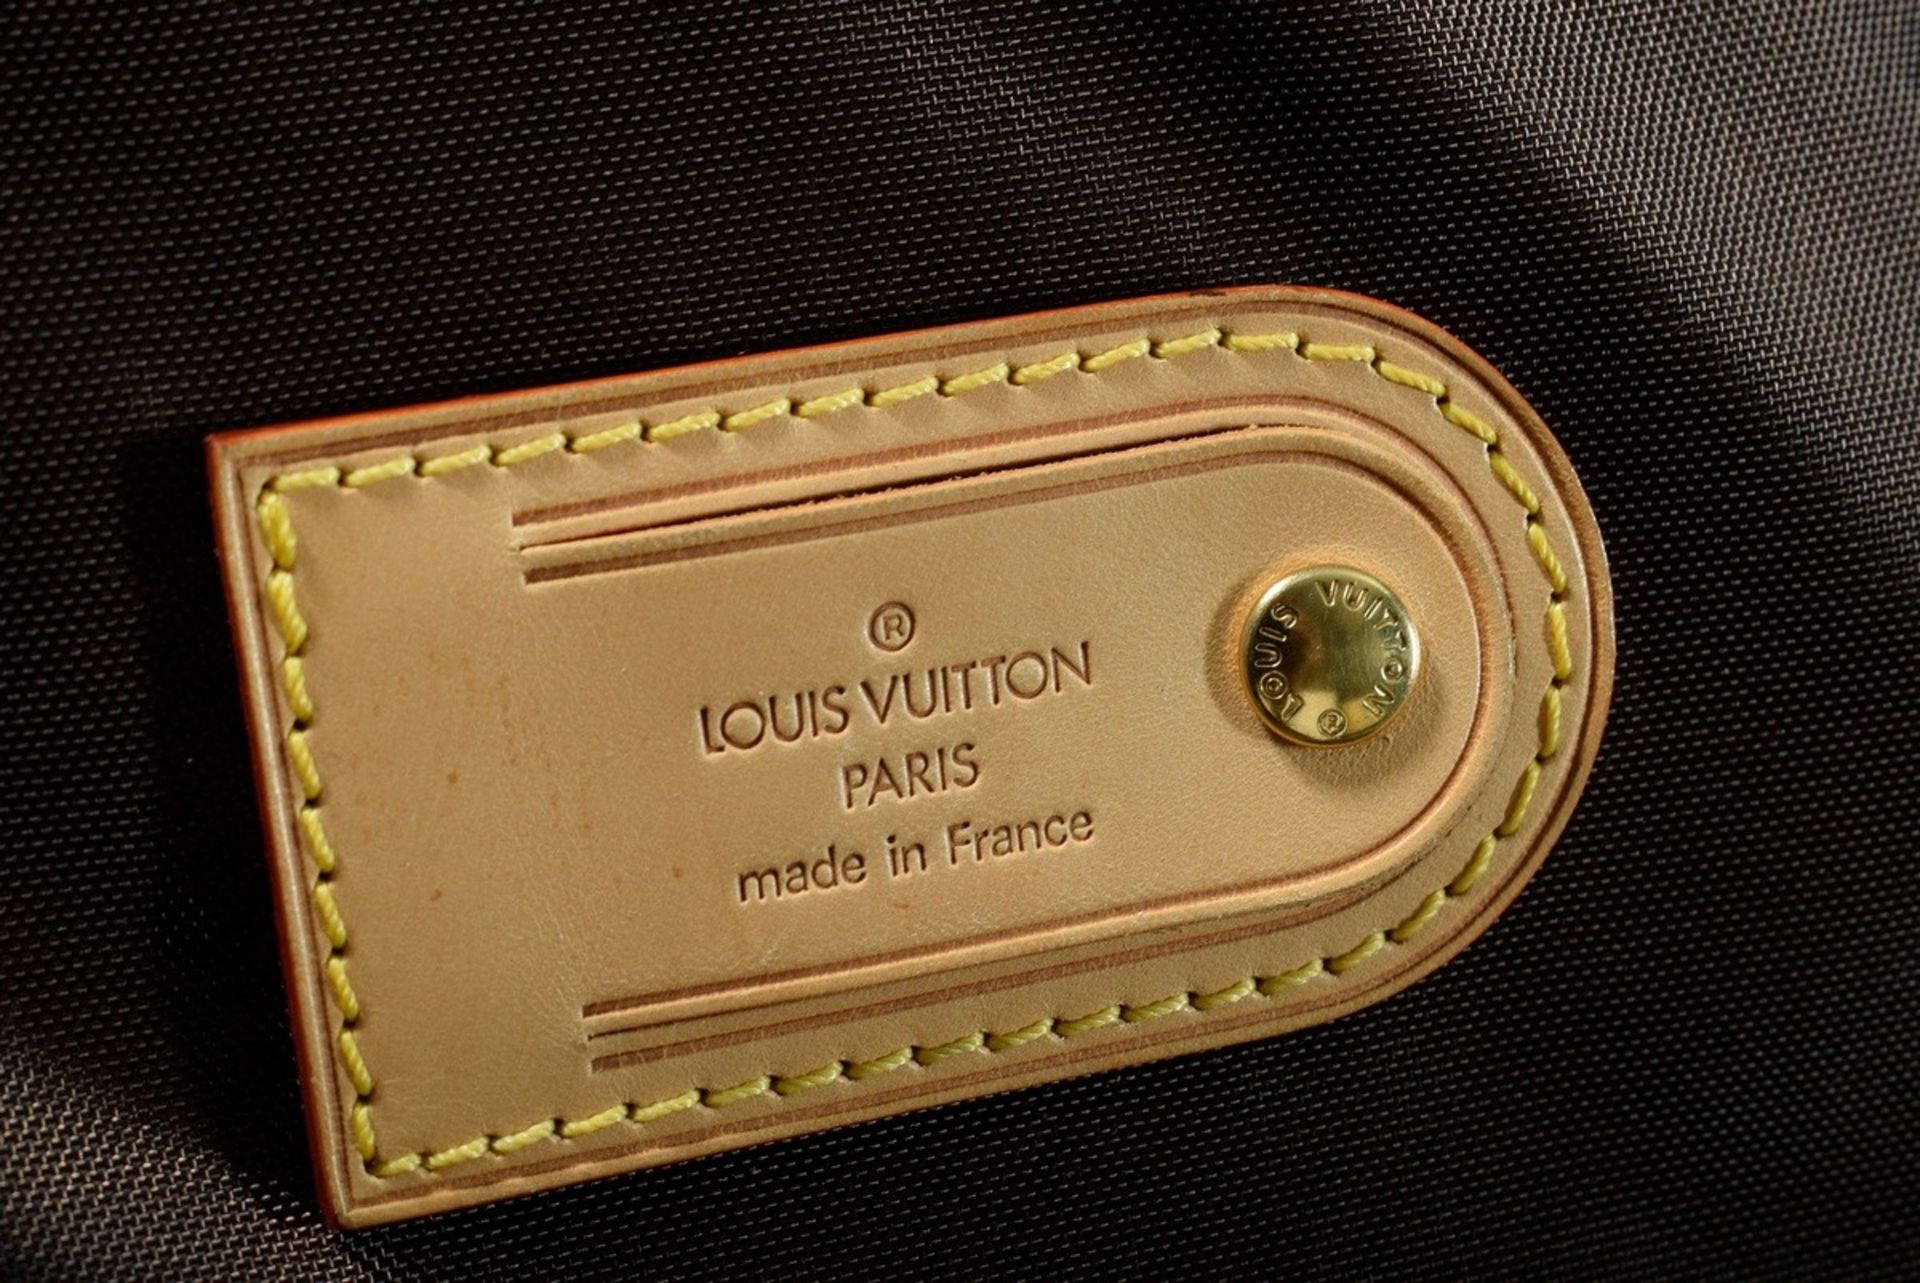 Louis Vuitton "Pégase 50" in "Monogram Canvas" with light cowhide details, gold-coloured hardware,  - Image 6 of 6